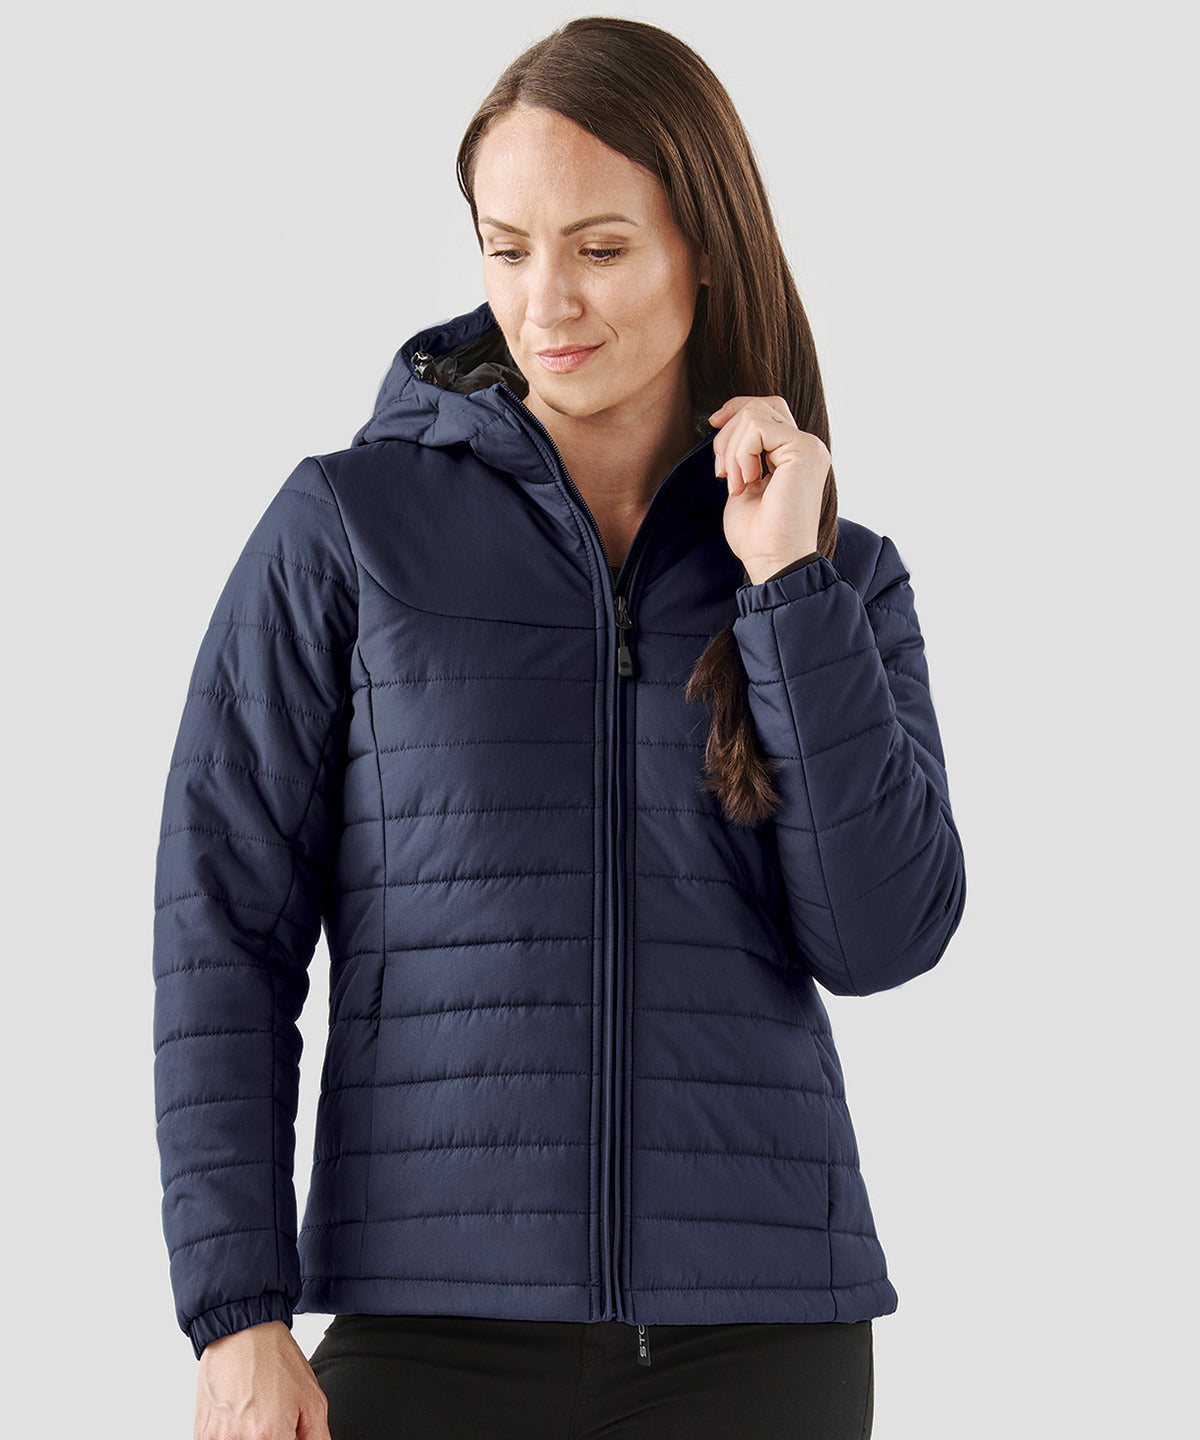 Womenâ€™s Nautilus quilted hooded jacket